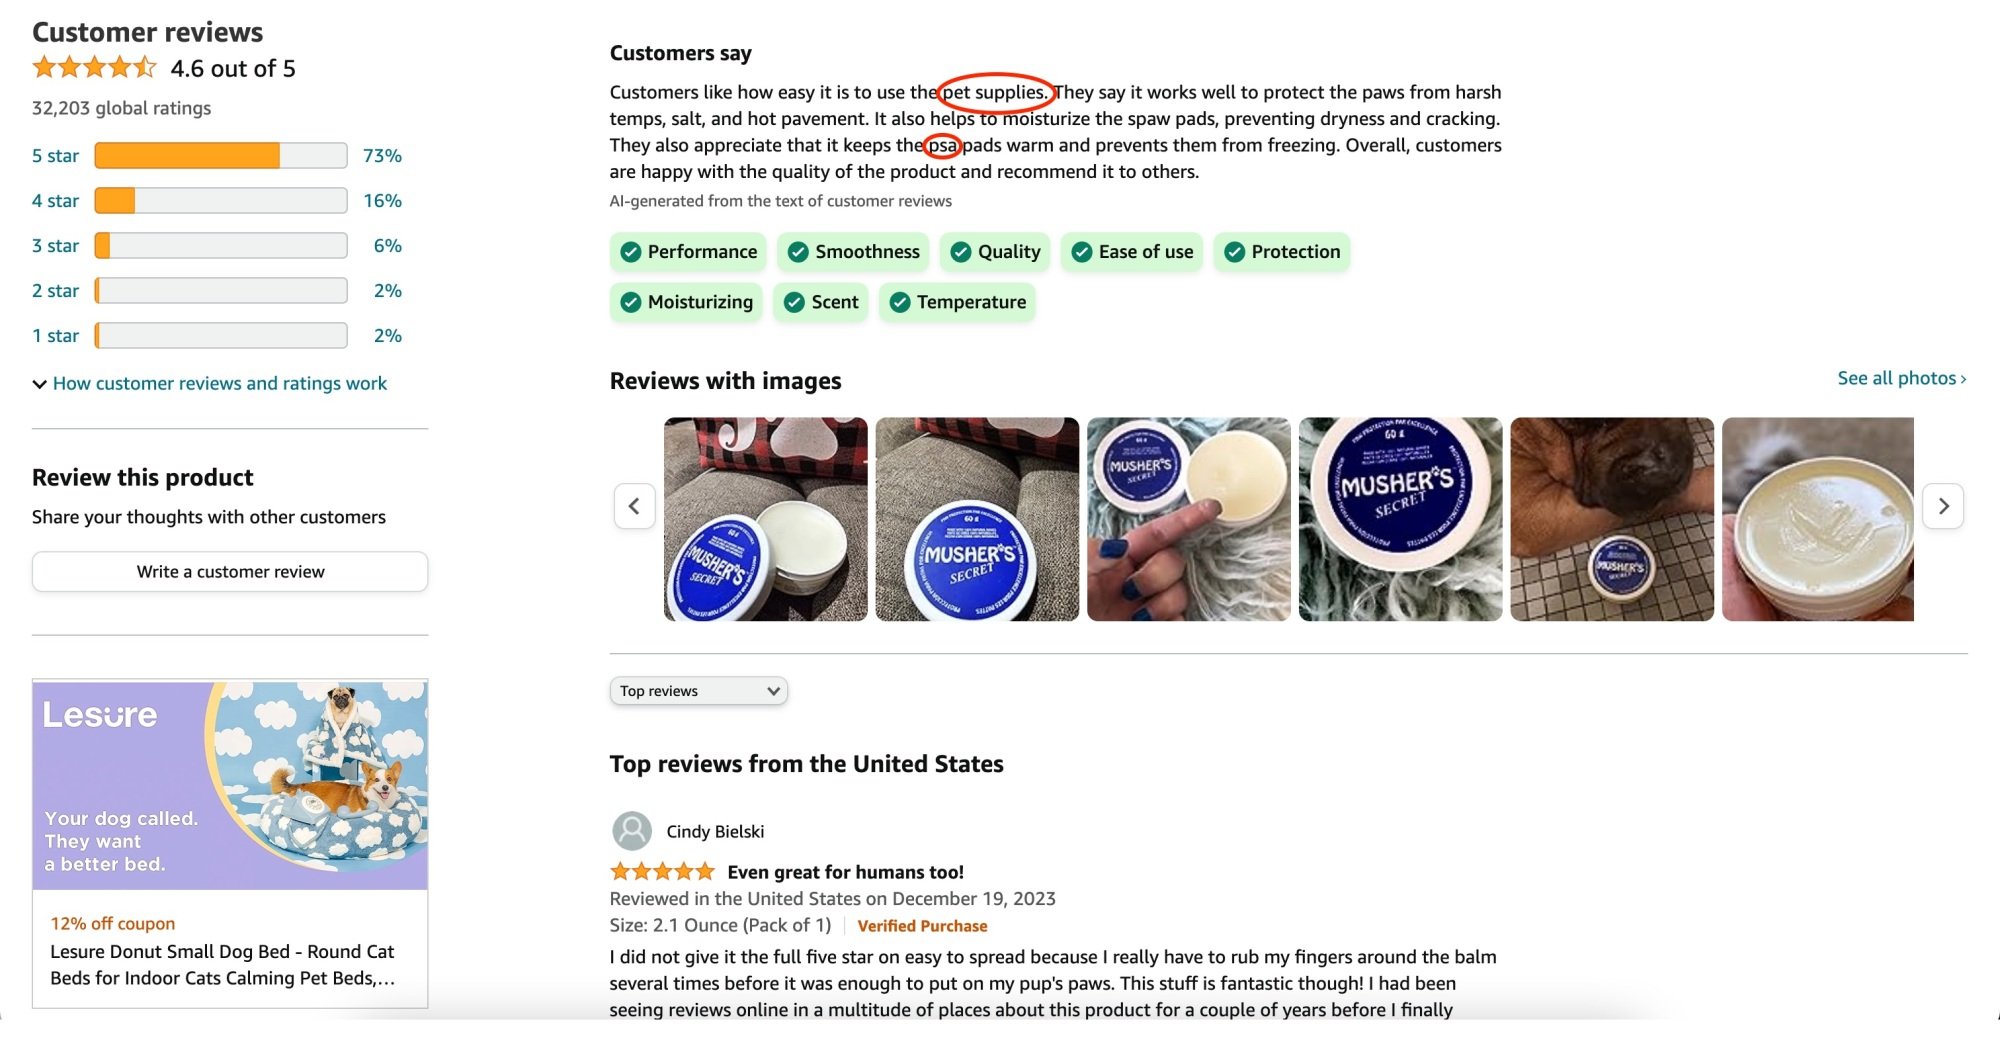 AI-generated product review summary of Musher's Secret showing typos